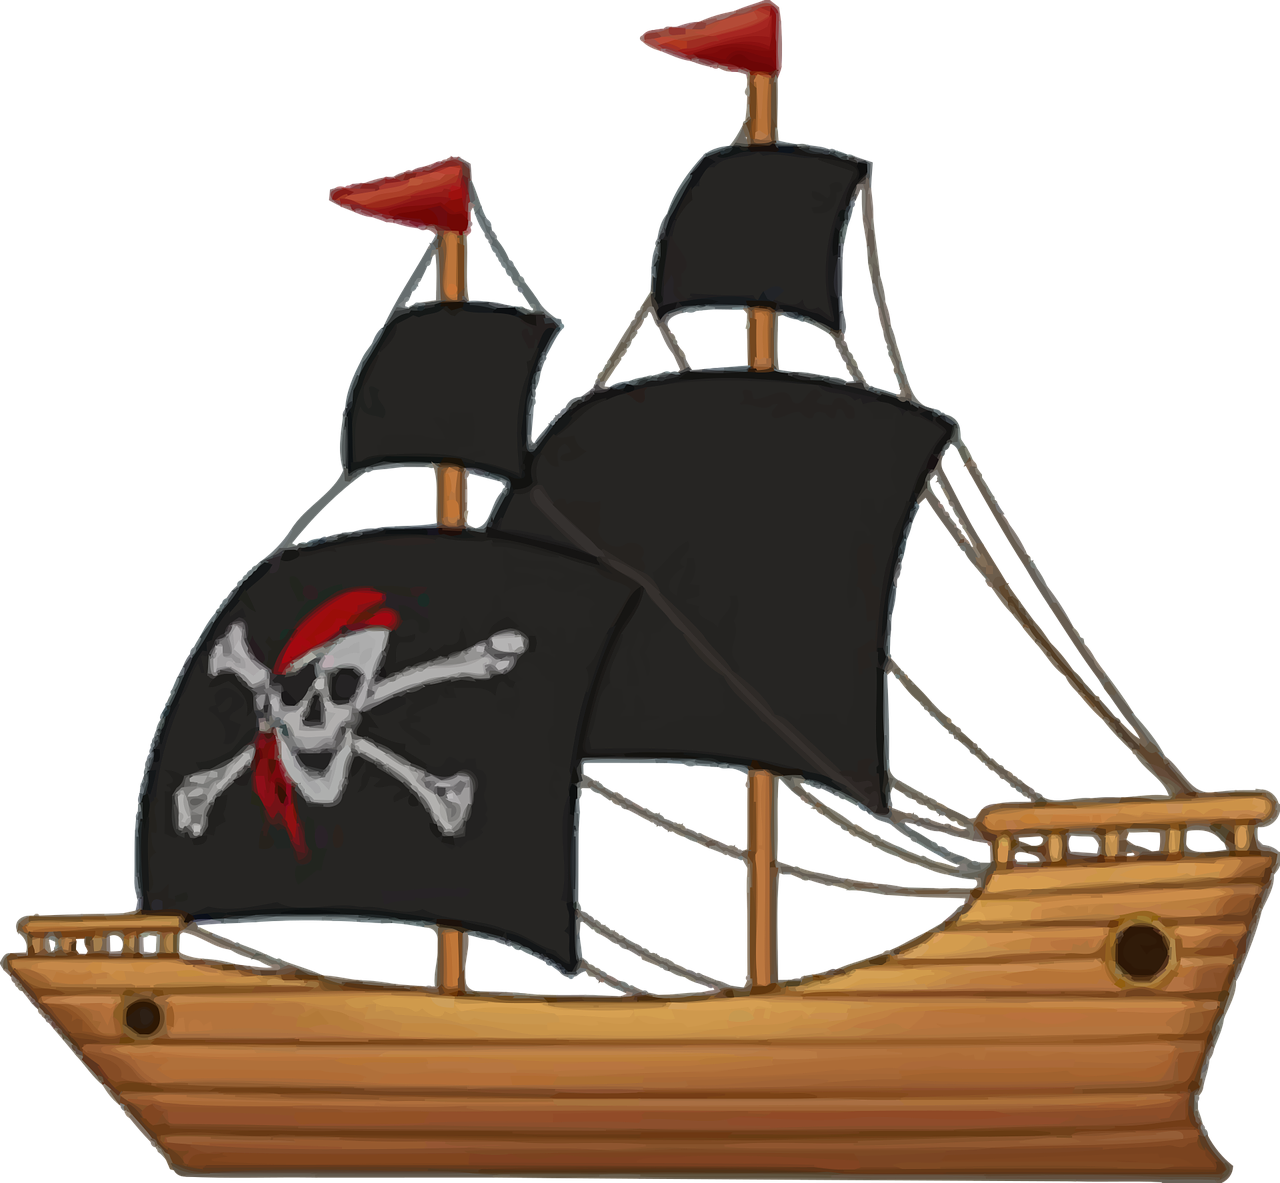 Pirate ship with skull of sail